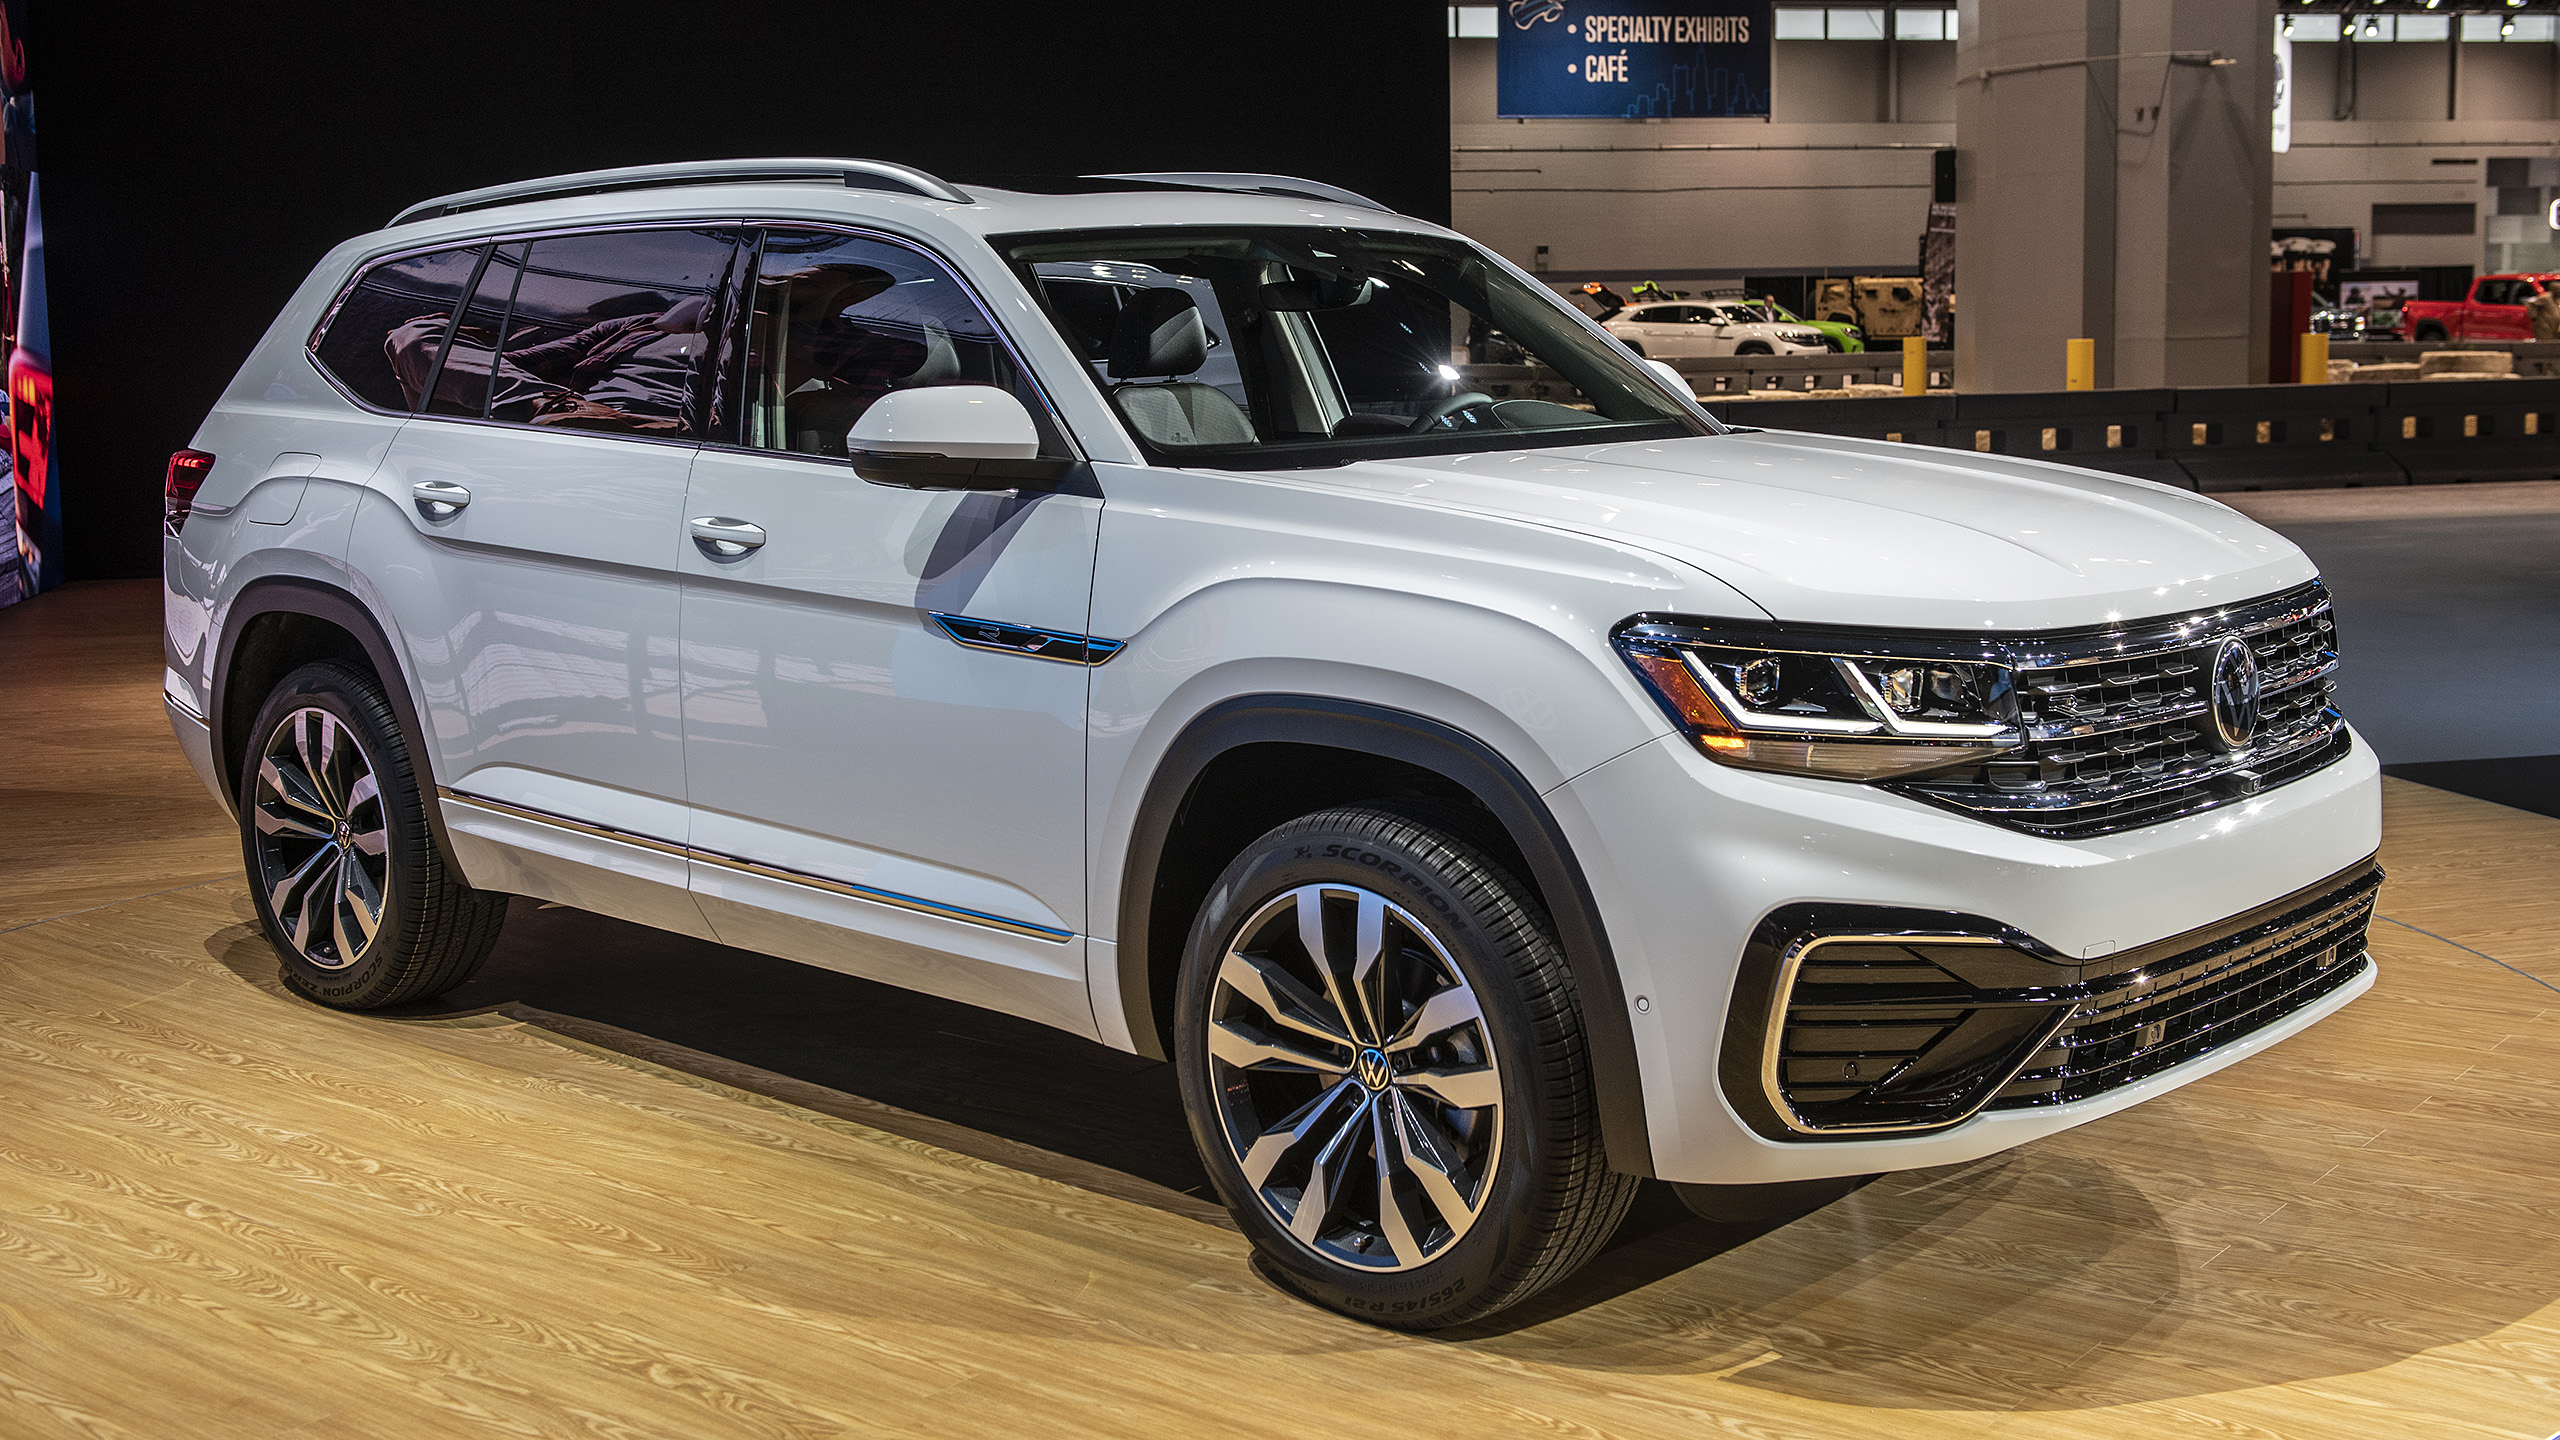 2021-volkswagen-atlas-unveiled-at-chicago-auto-show-with-new-design